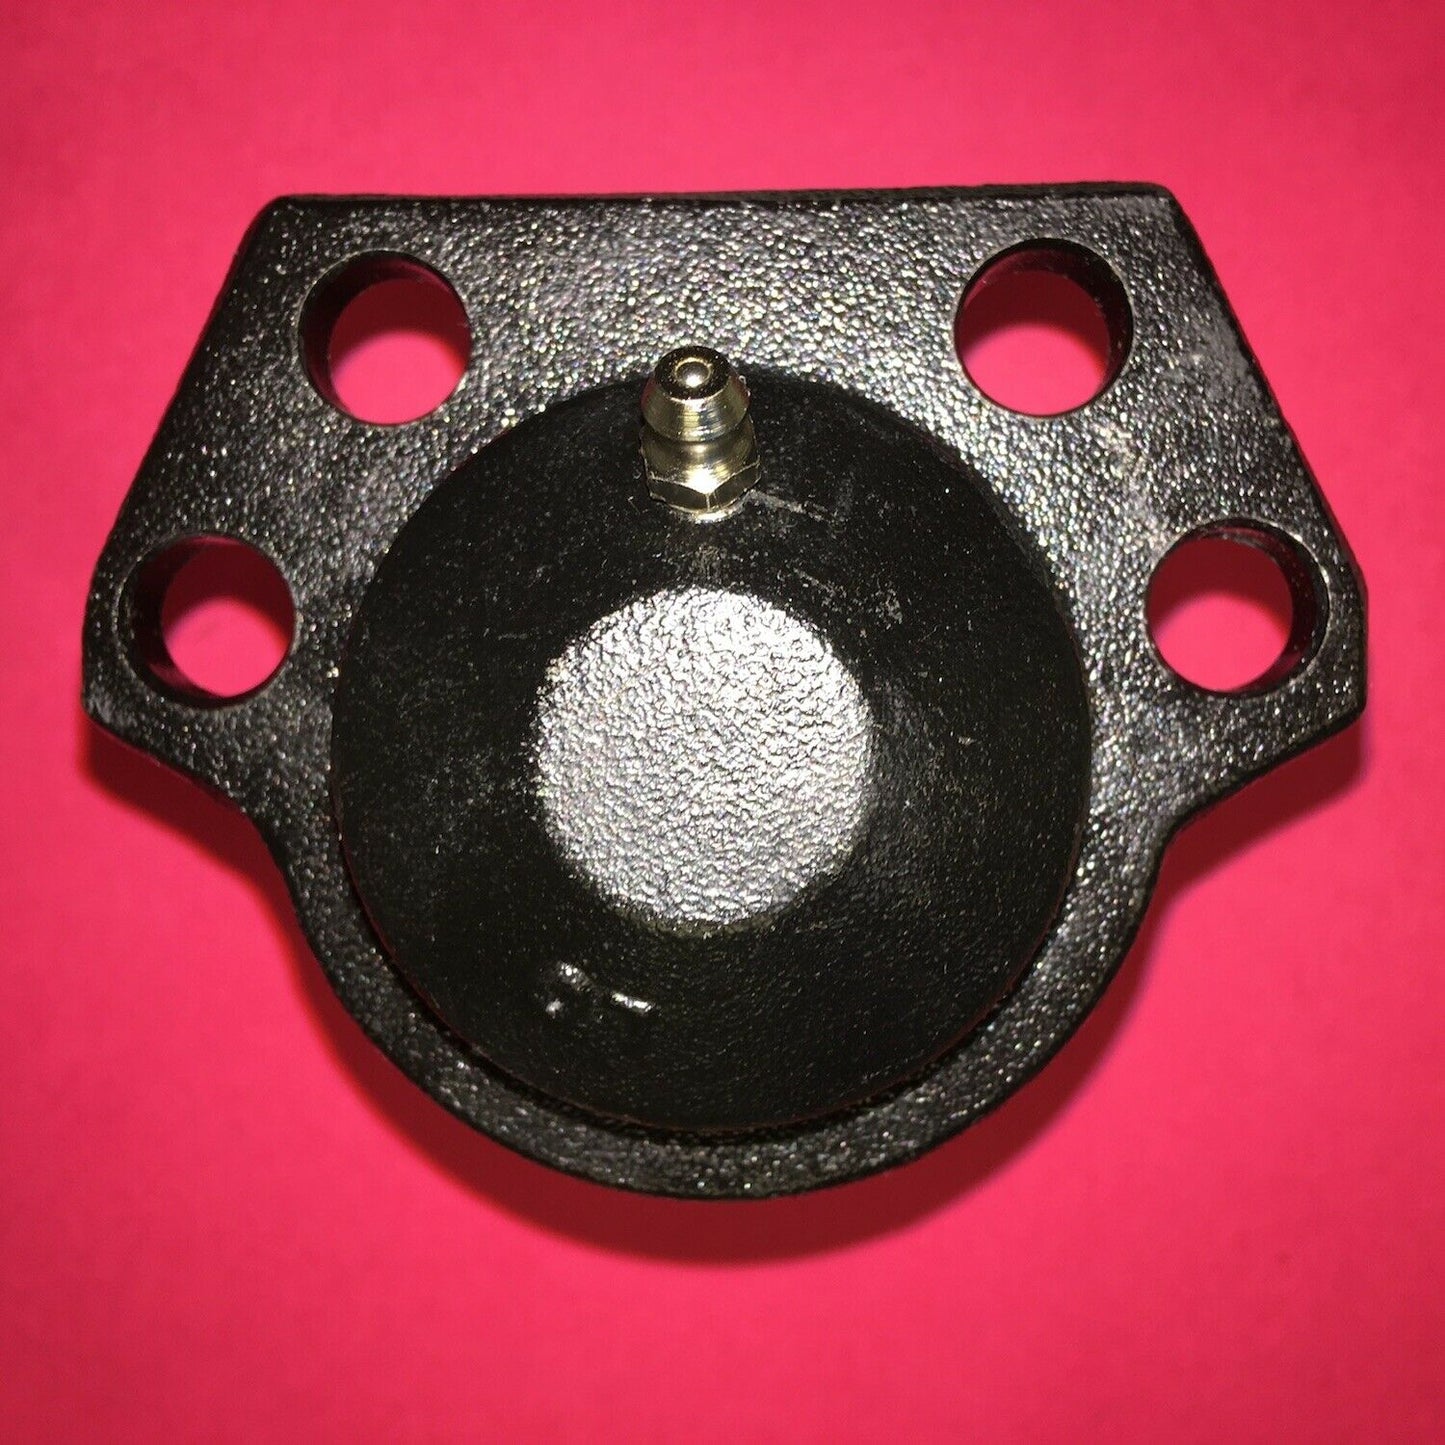 2 each - LOWER BALL JOINT 3/8" holes; M998 early model; 2530011883684 12338328 12342645-2